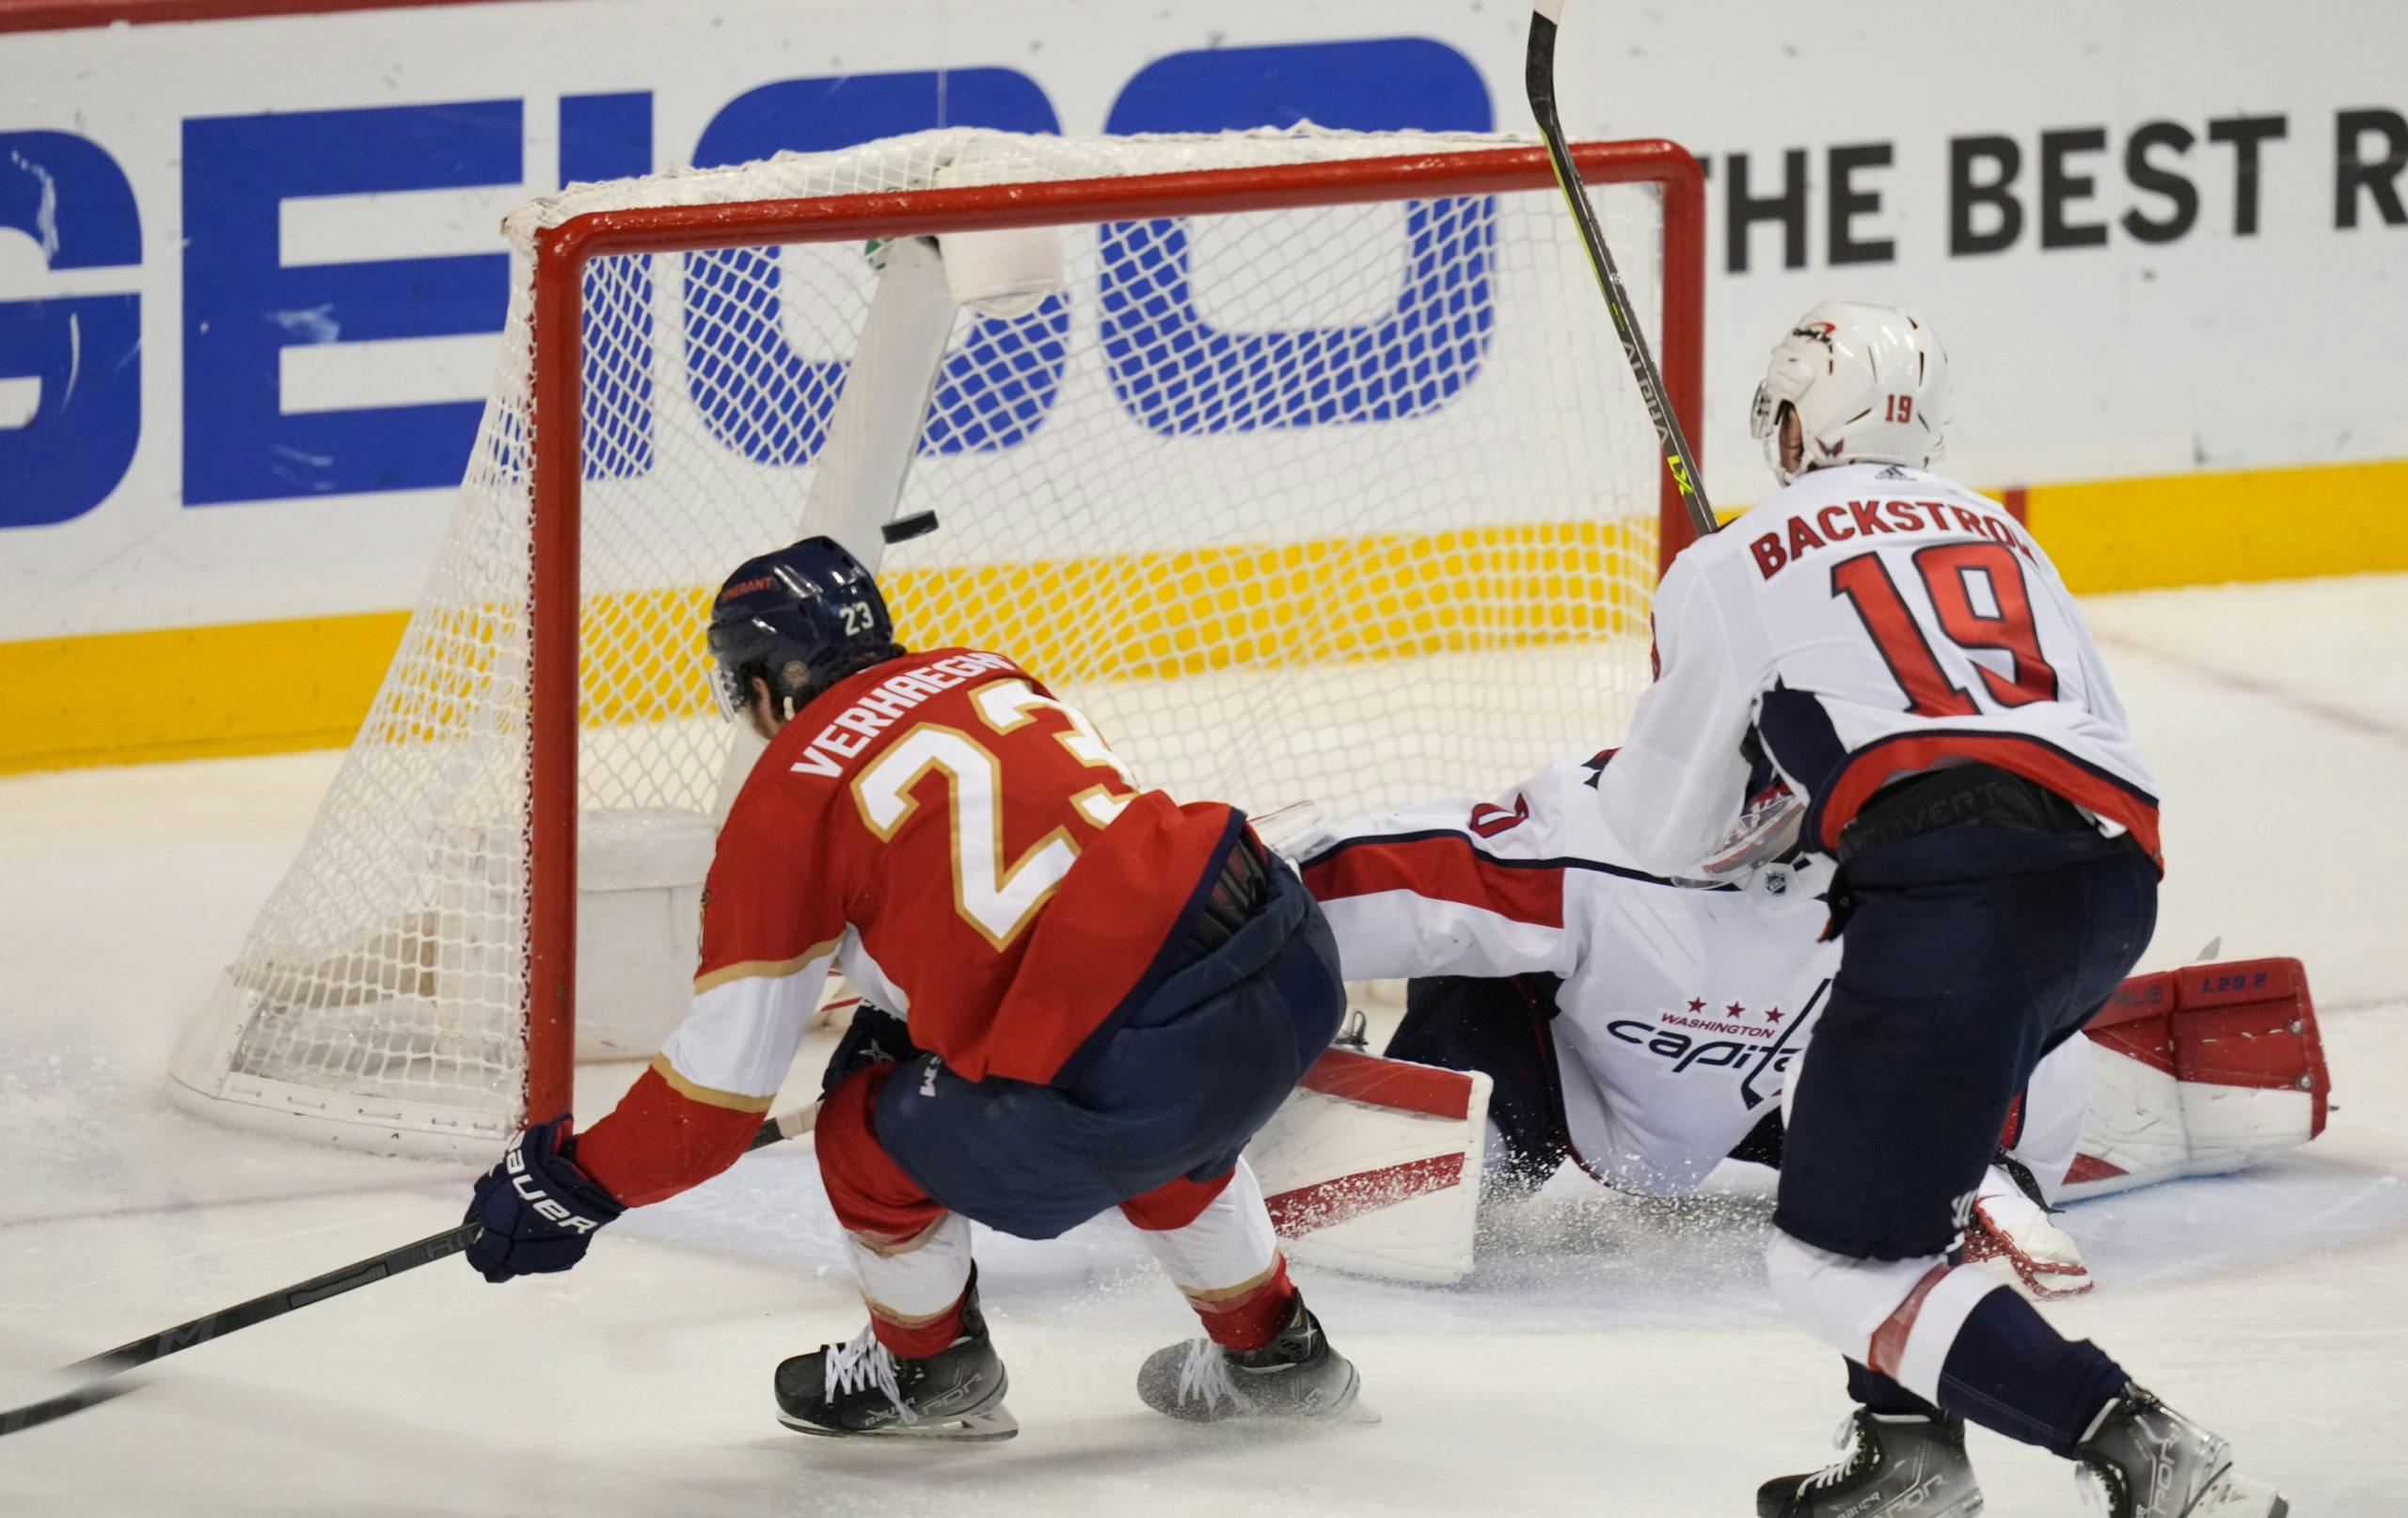 Stanley Cup Playoffs Day 10: Panthers, Rangers, Flames all make big comebacks to win